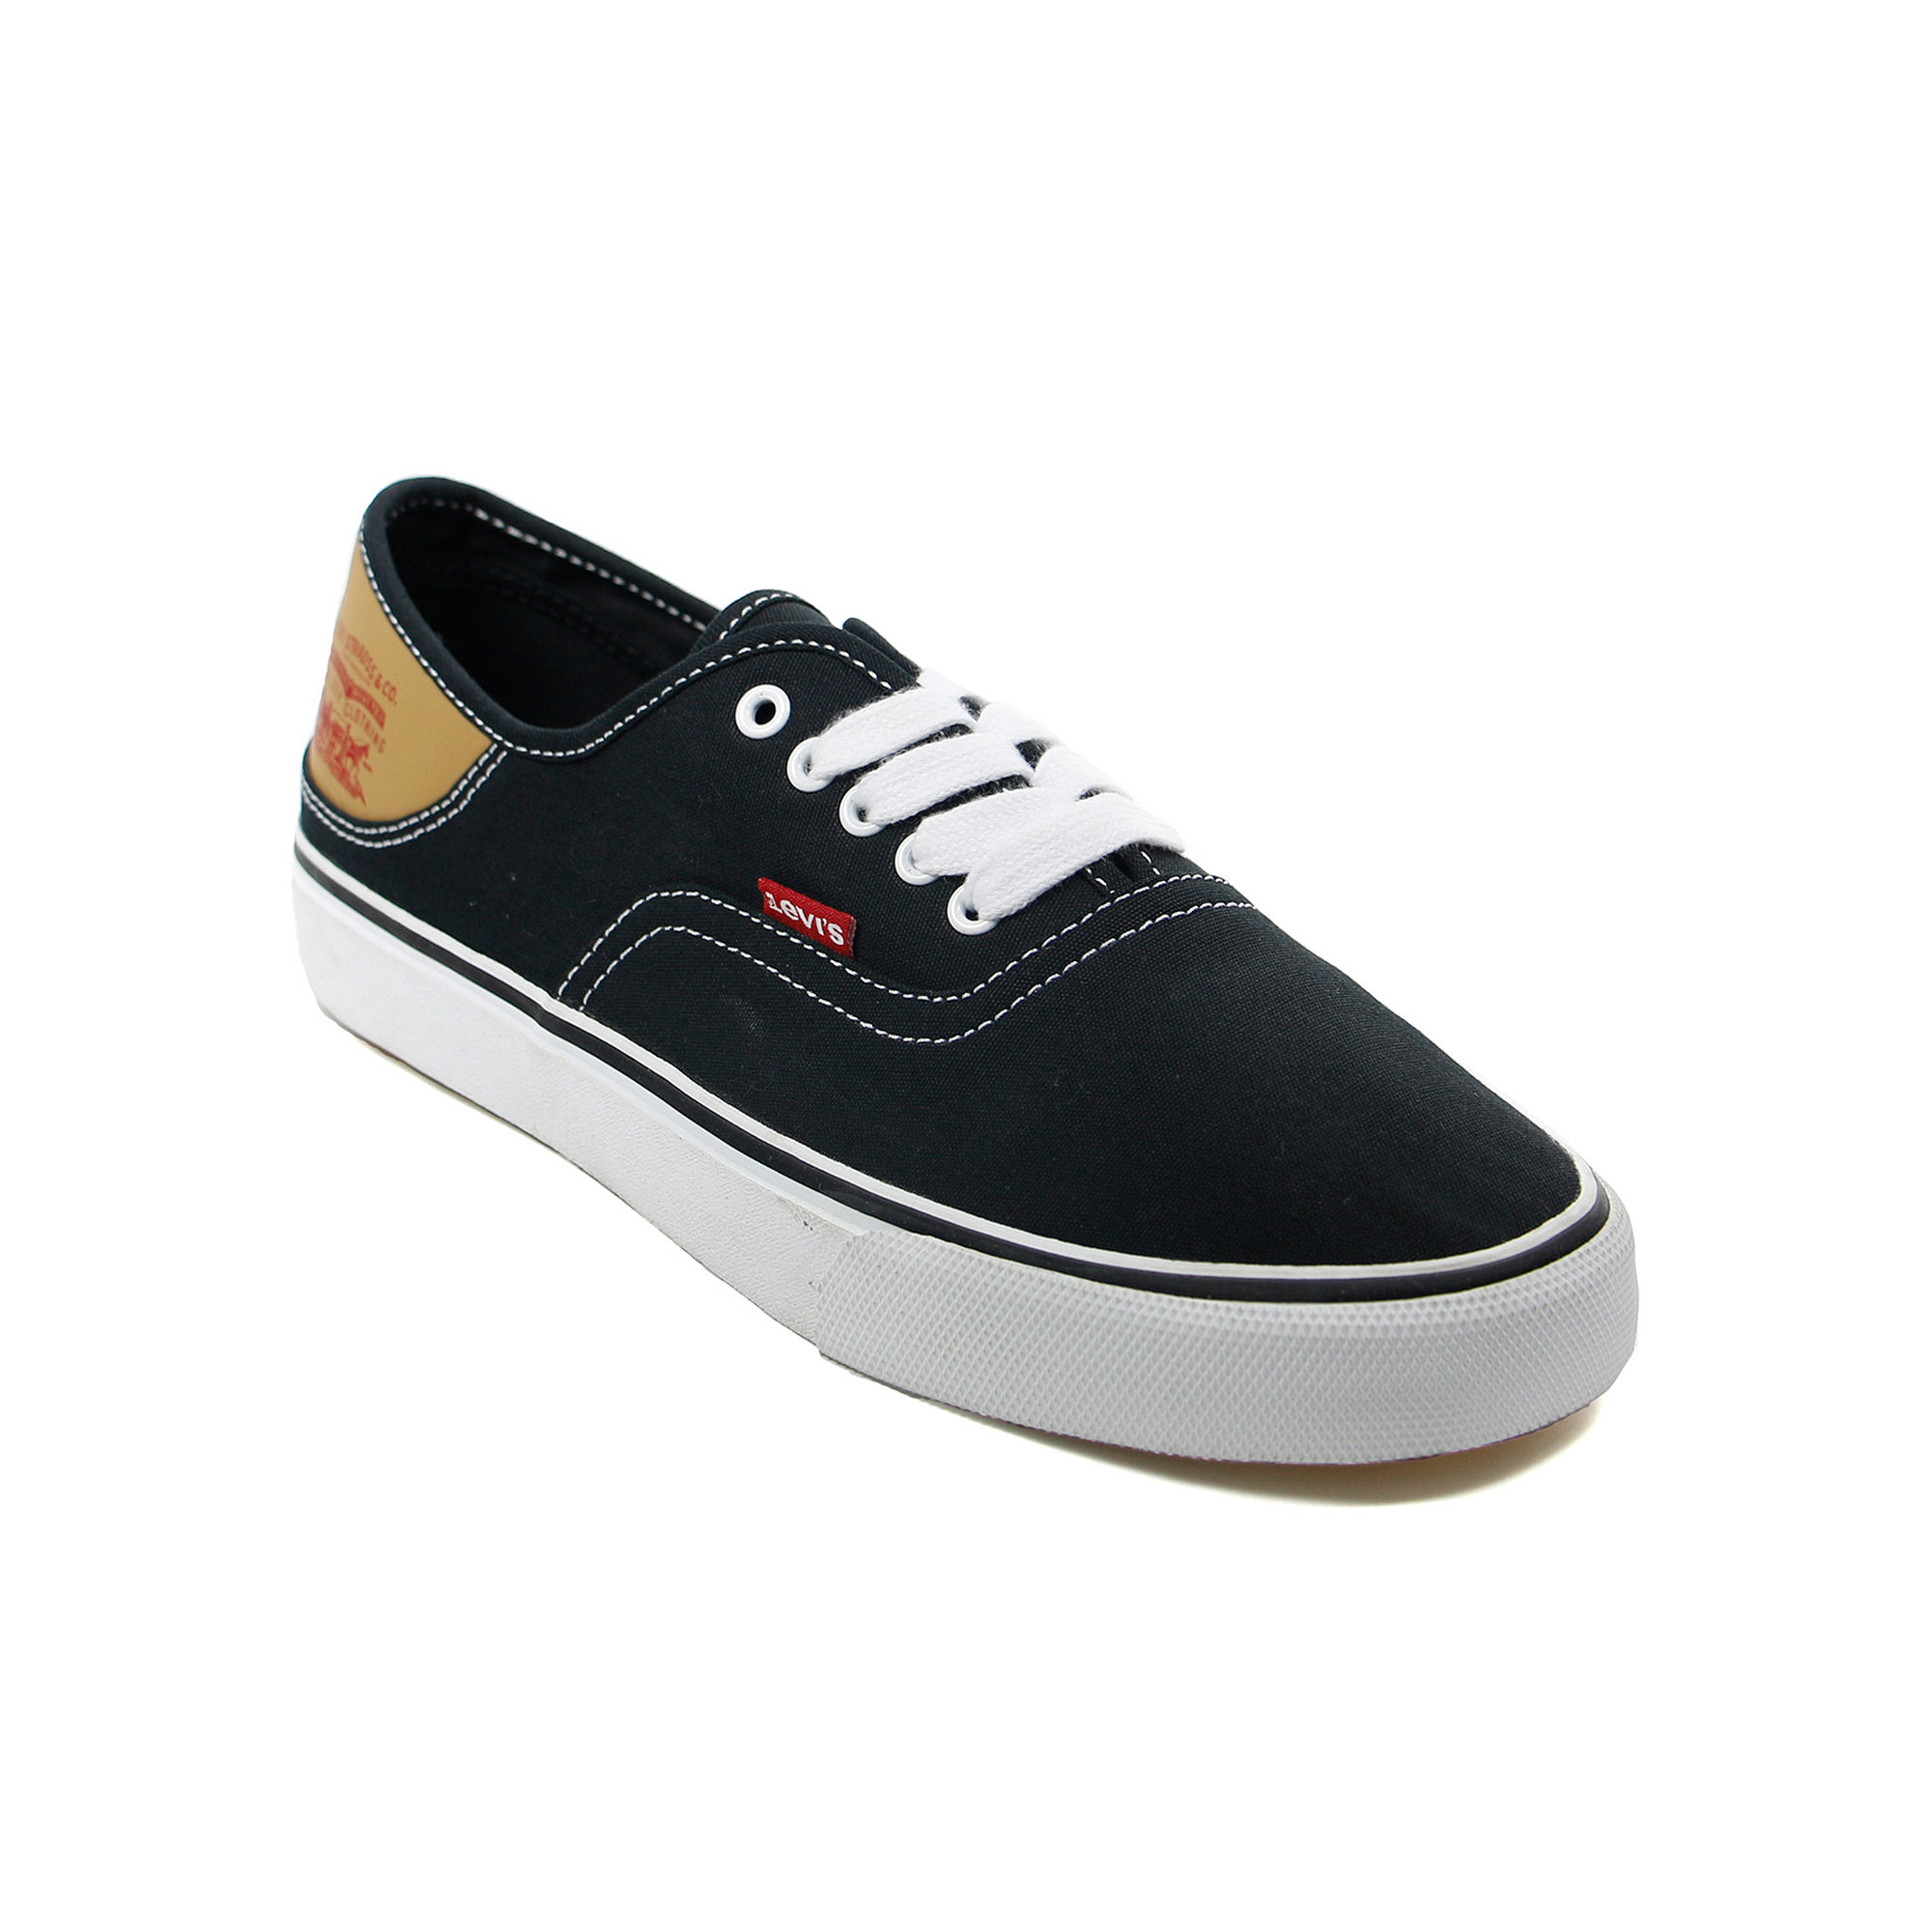 UPC 887326867506 product image for Levis Jordy Buck Mens Sneakers | upcitemdb.com